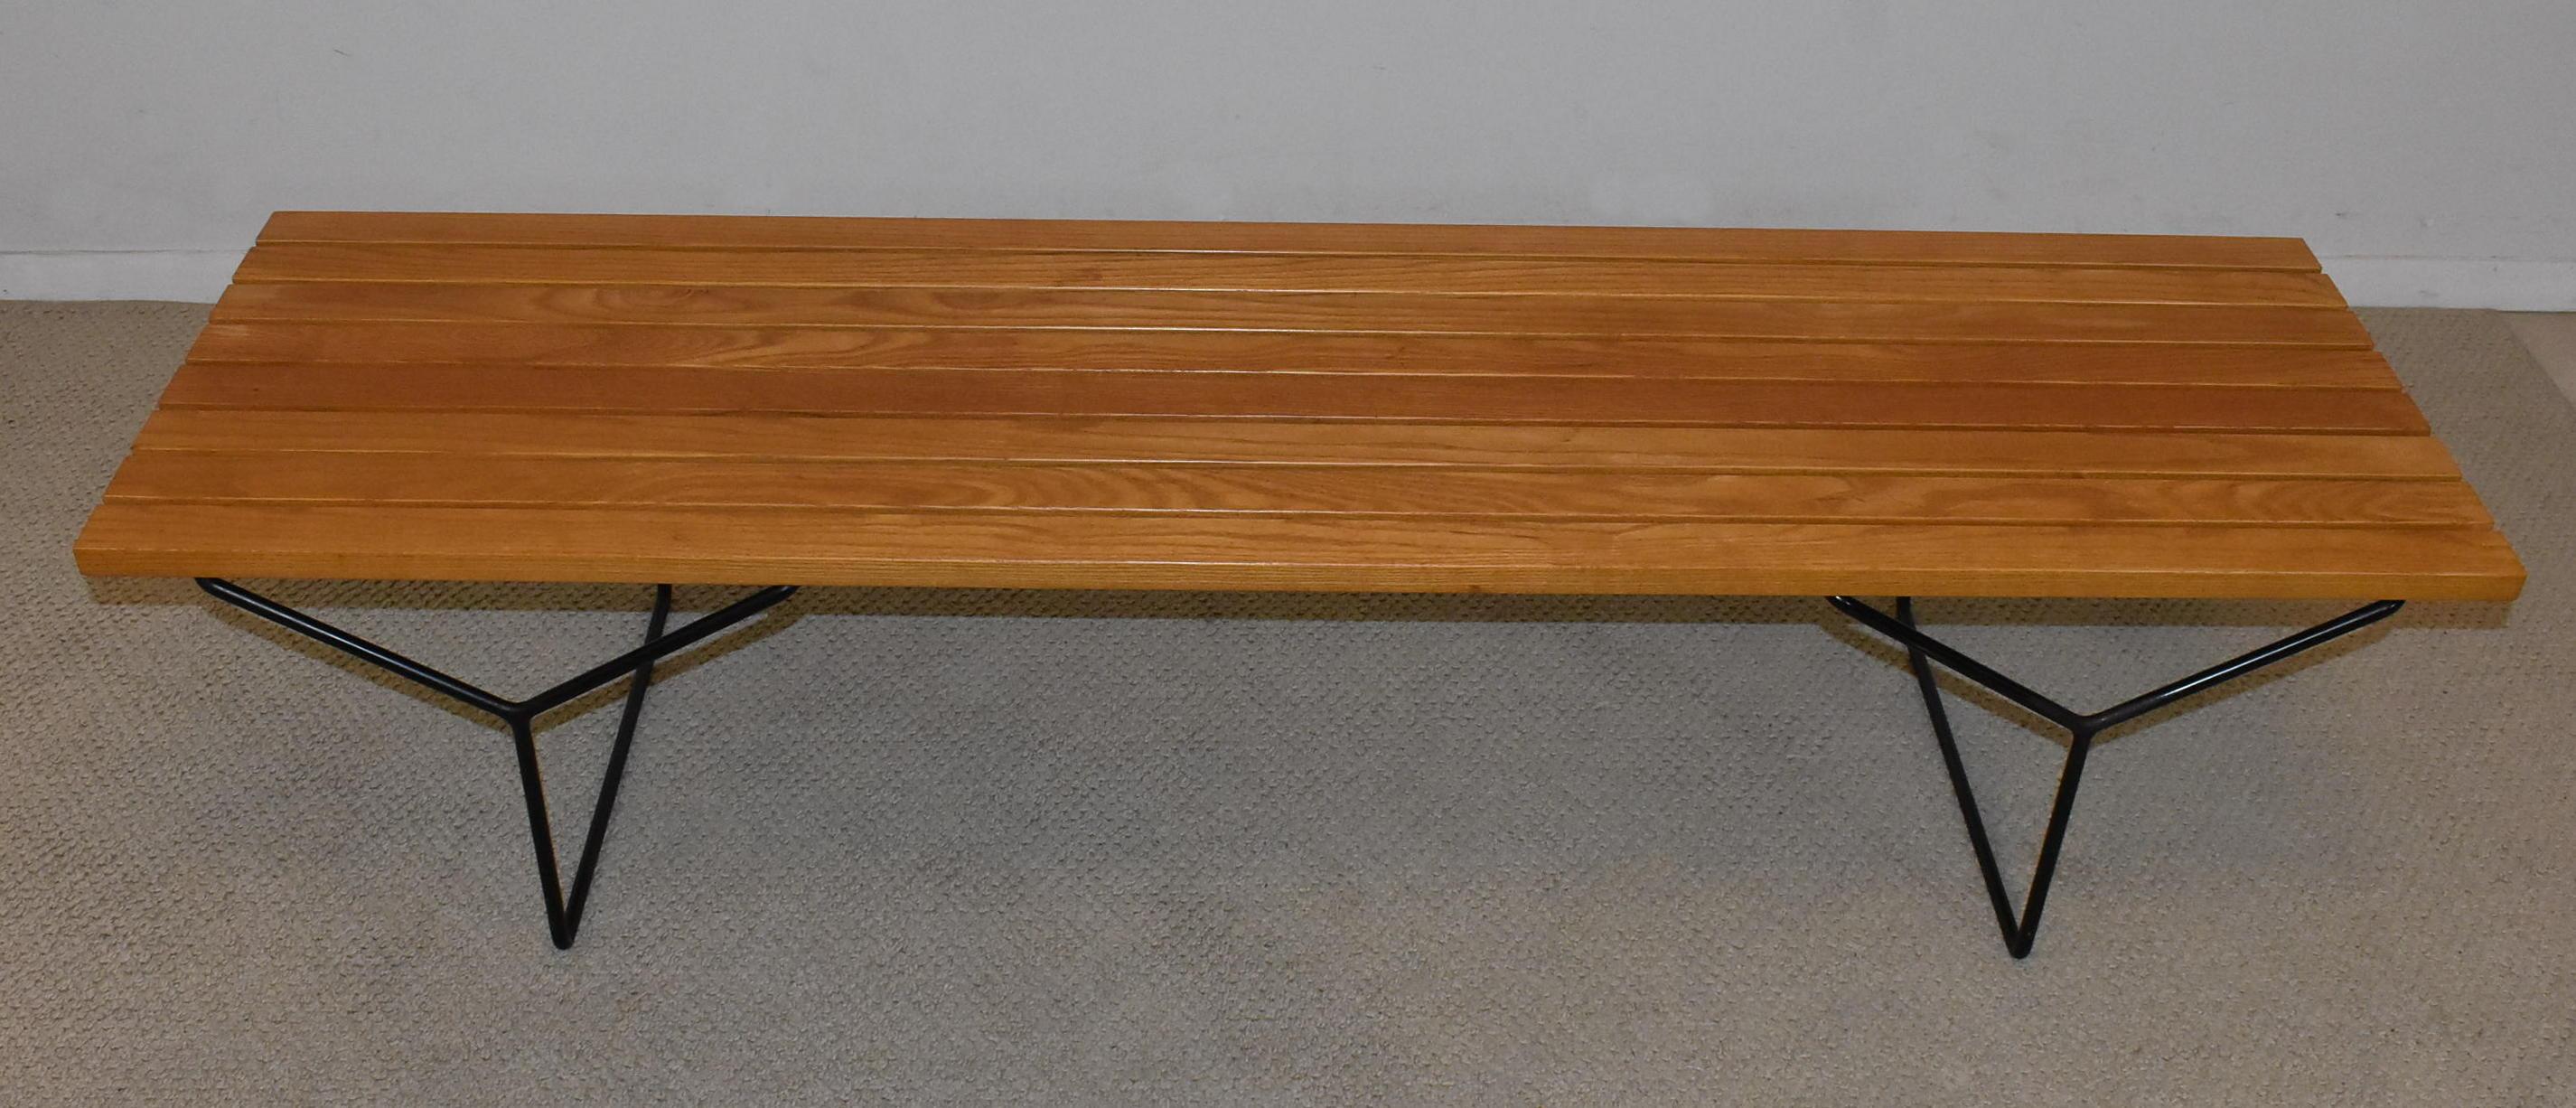 Knoll Mid-Century Modern oak and steel slated bench / coffee table attributed to Harry Bertia.